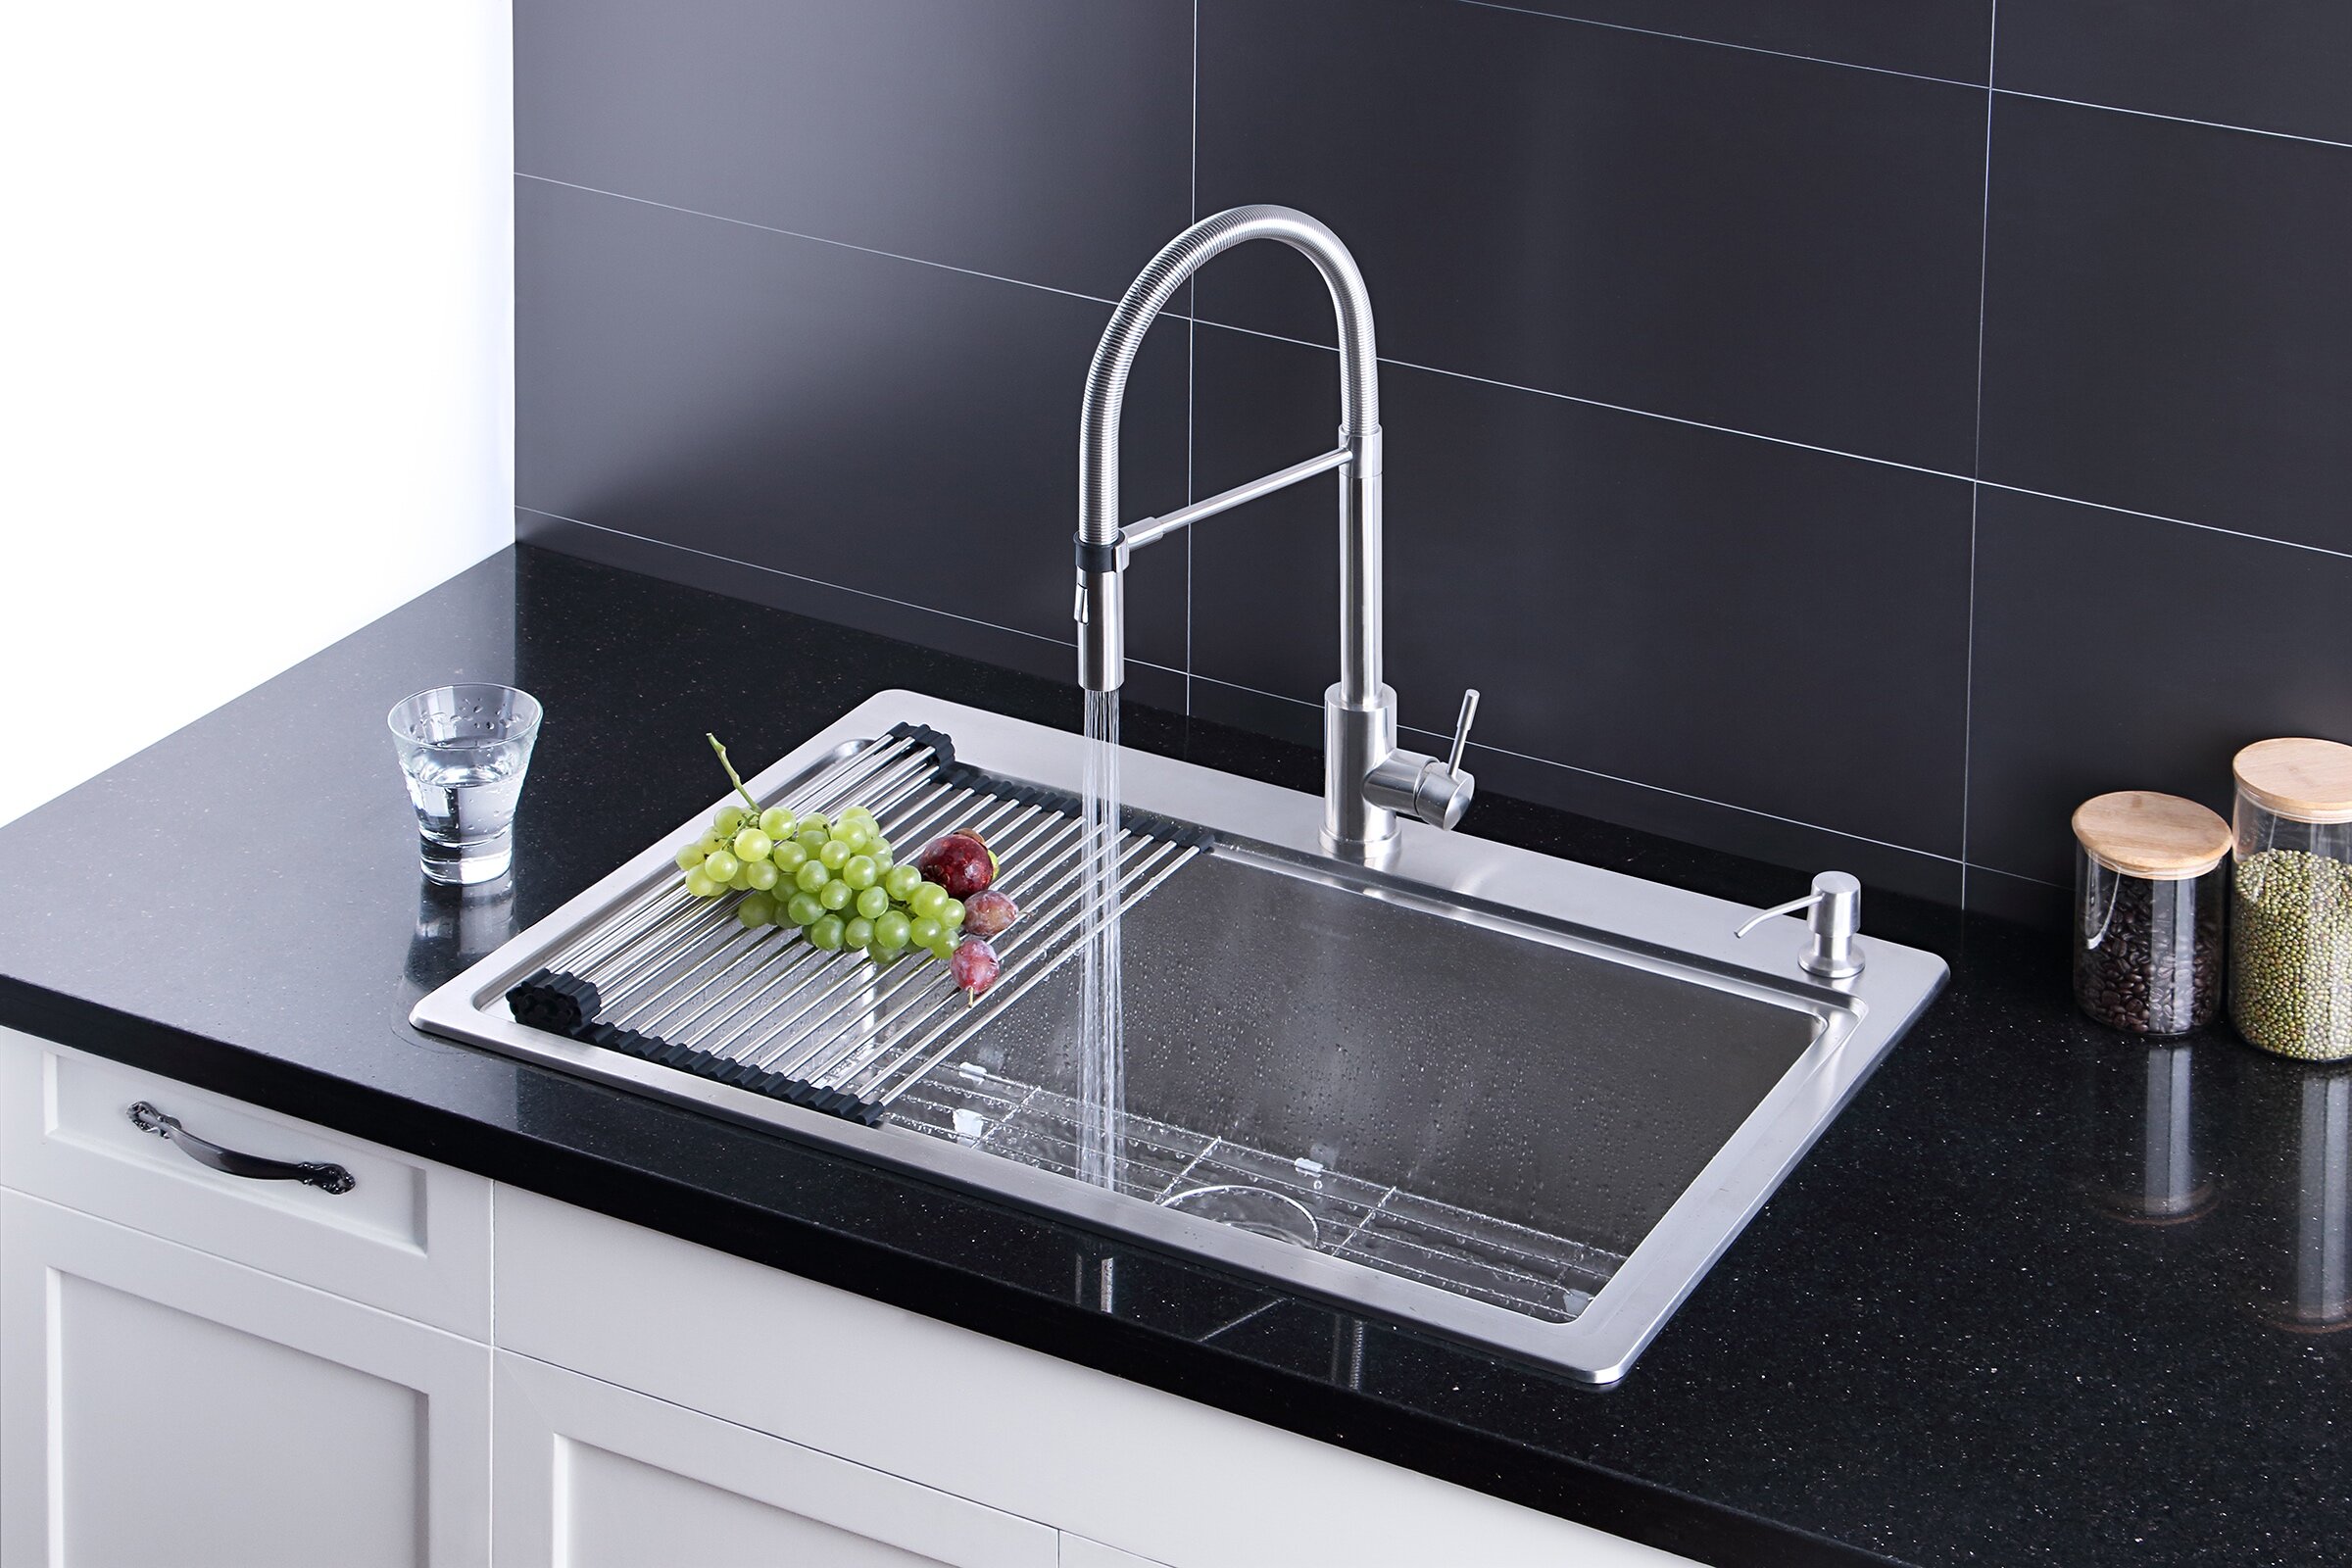 Afa Stainless 33 L X 22 W Dual Mount Kitchen Sink With Faucet And Soap Dispenser Reviews Wayfair